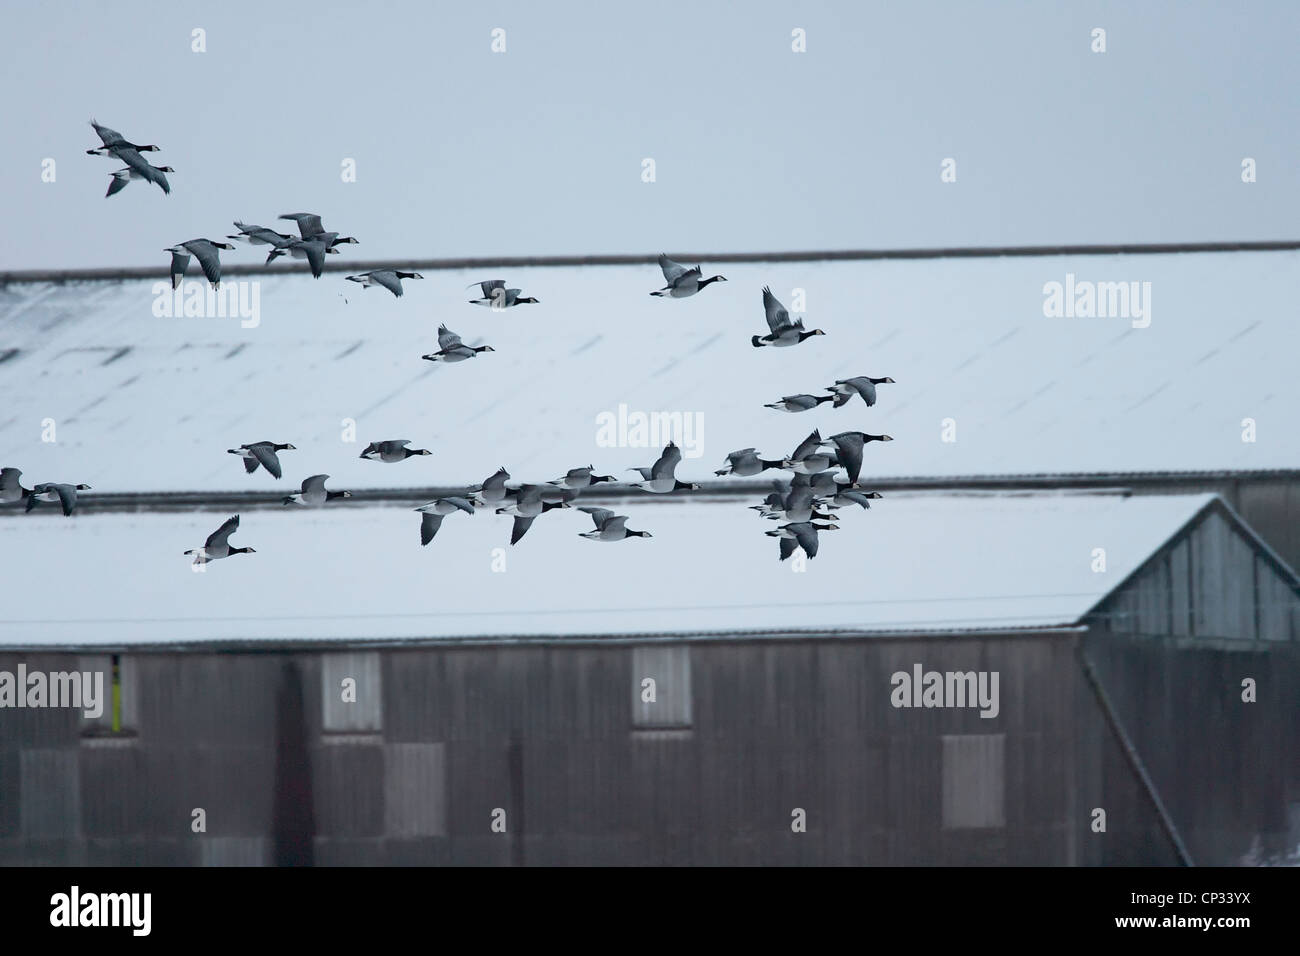 Barnacle Geese (Branta leucopsis) taking off in flight over snow covered farm building. Stock Photo